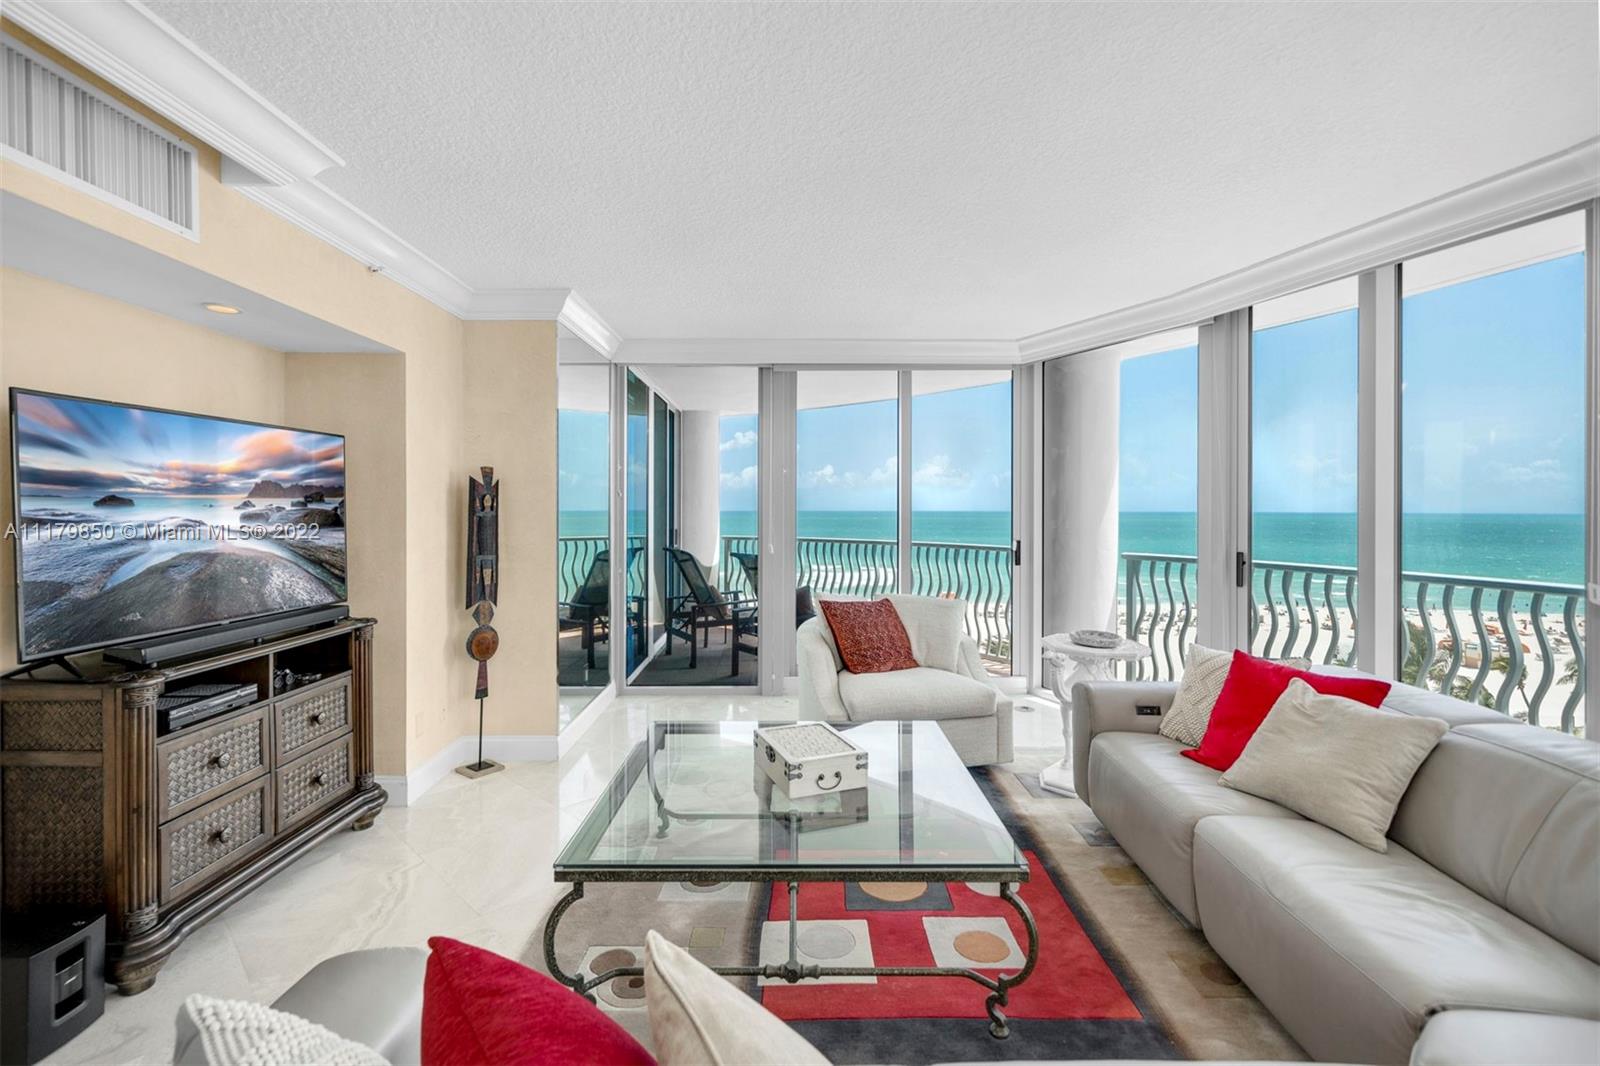 Enjoy gorgeous views of the Atlantic Ocean in this SE corner 3 bedroom residence located at 1500 Ocean. As an originator of luxury in Miami Beach, 1500 Ocean was designed by renowned architect, Michael Graves. This spacious 2,000+ SF residence features an oceanfront primary suite with separate jacuzzi tub and shower, marble floors and a custom kitchen. 1500 Ocean is a full service luxury building with 24 hr. security, valet and front desk attendant, concierge, gym with sauna and steam room and private beach. 

This property is available as of 4/10/2023